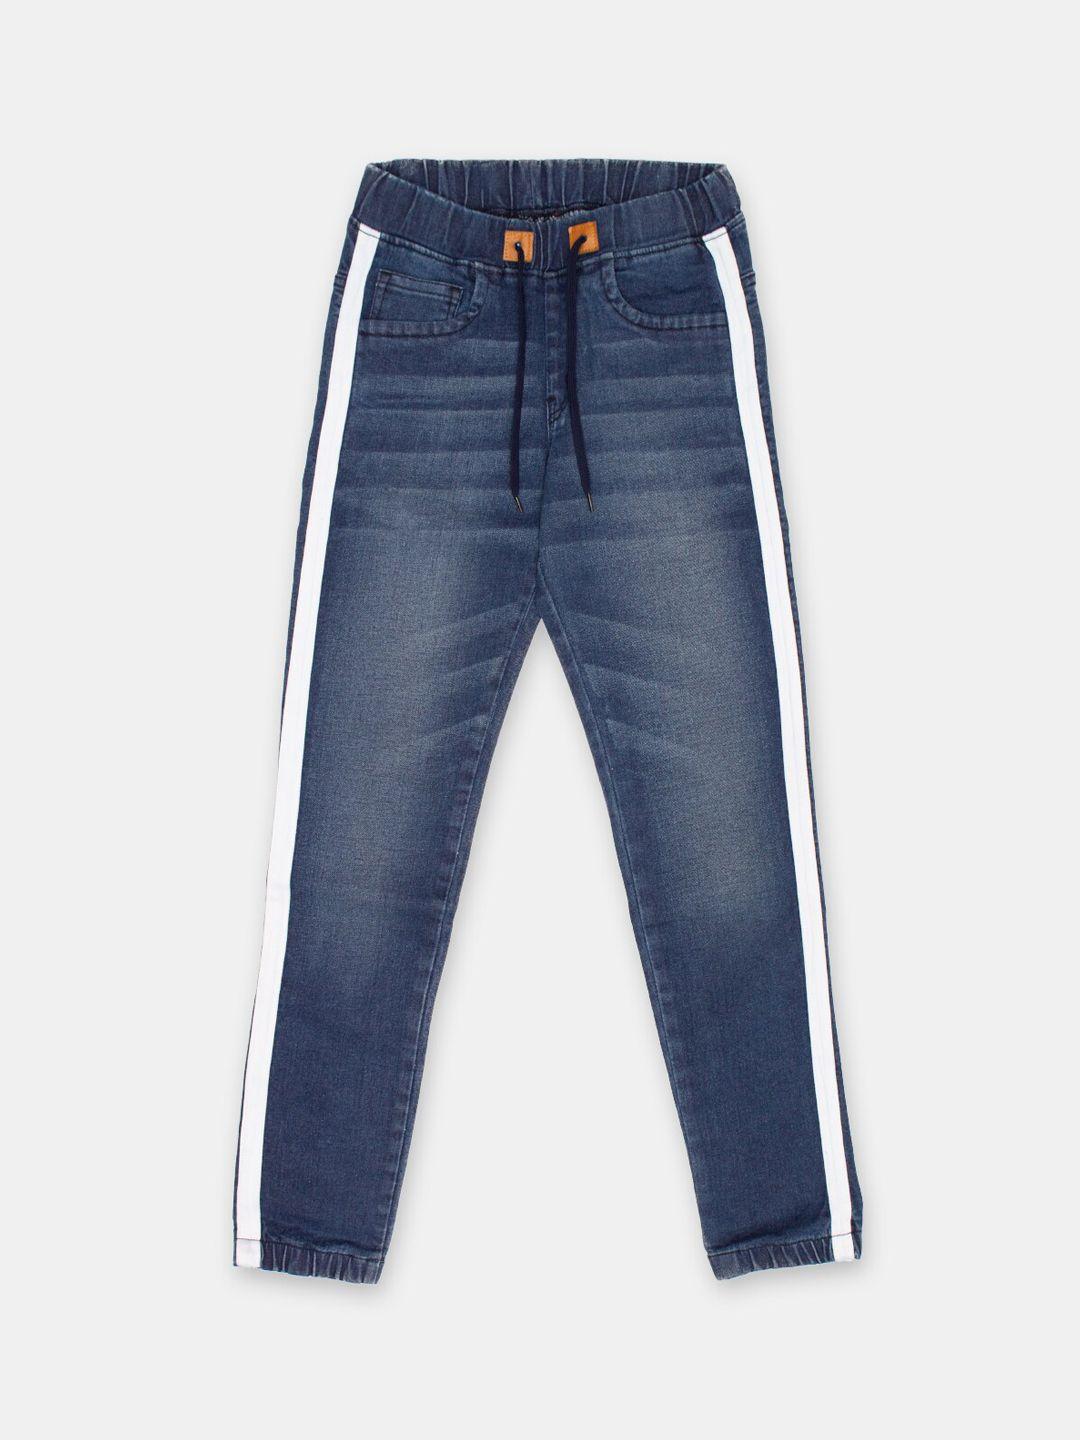 instafab boys blue regular fit mid-rise clean look jeans